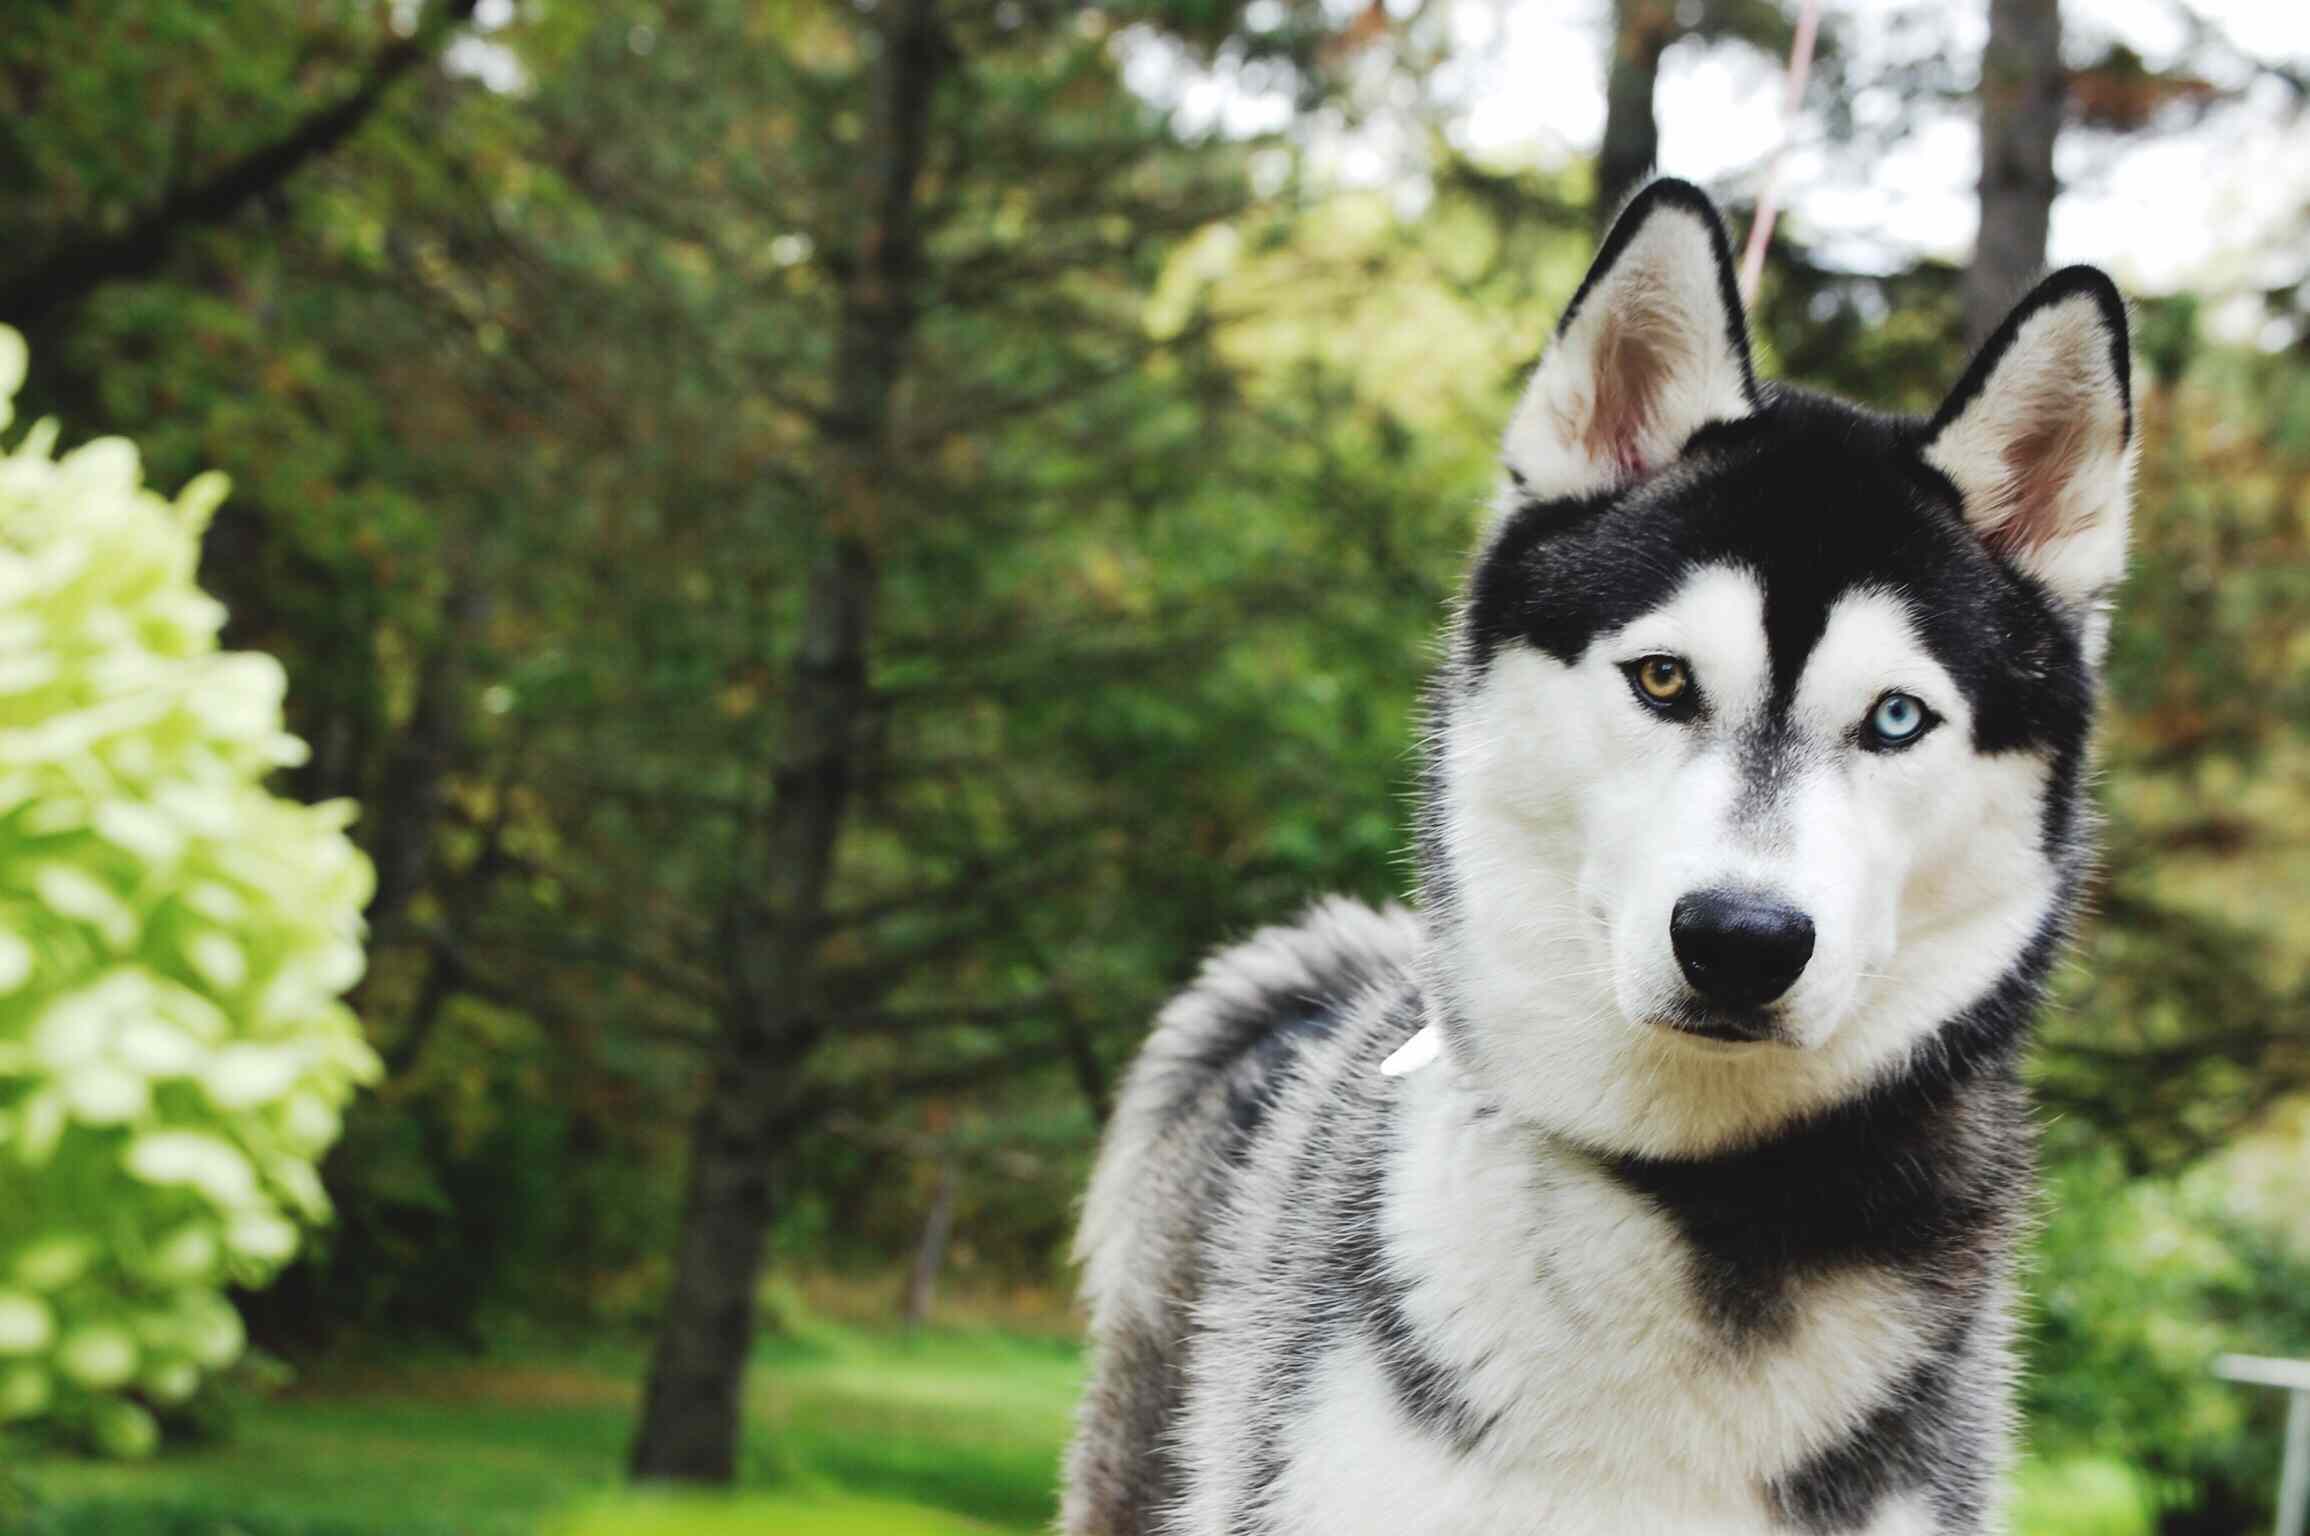 Husky head shot standing in a garden with trees in background